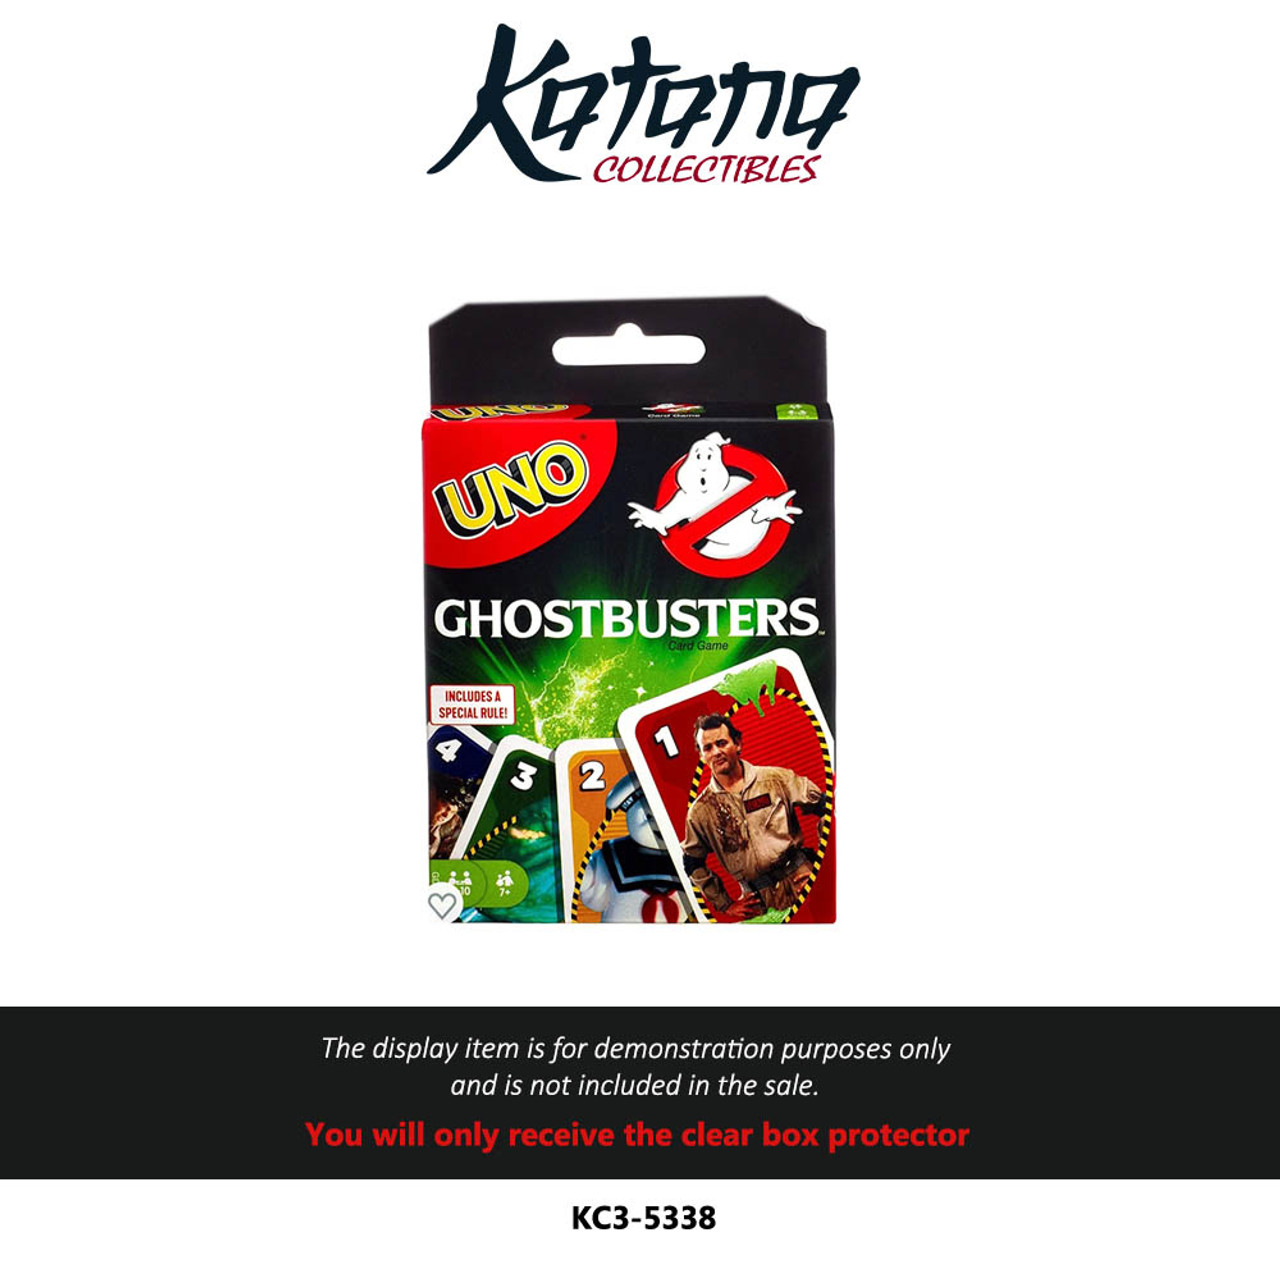 Katana Collectibles Protector For Ghostbusters UNO